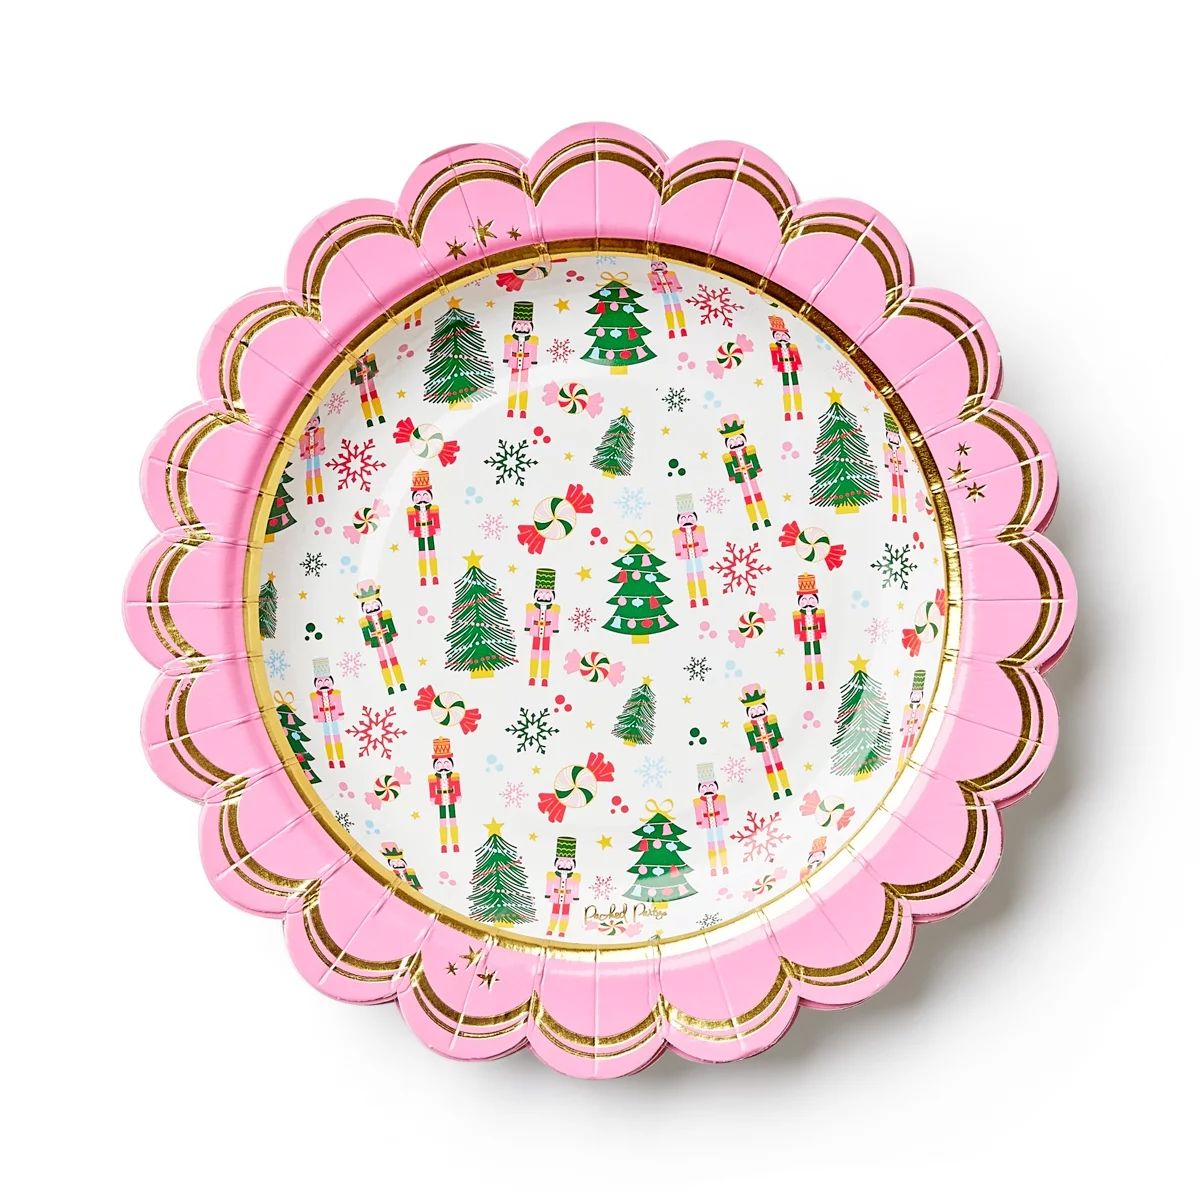 Packed Party "Nuts for You" 7" Scalloped Holiday Paper Dessert Plates, 10CT, Pink, Nutcracker | Walmart (US)